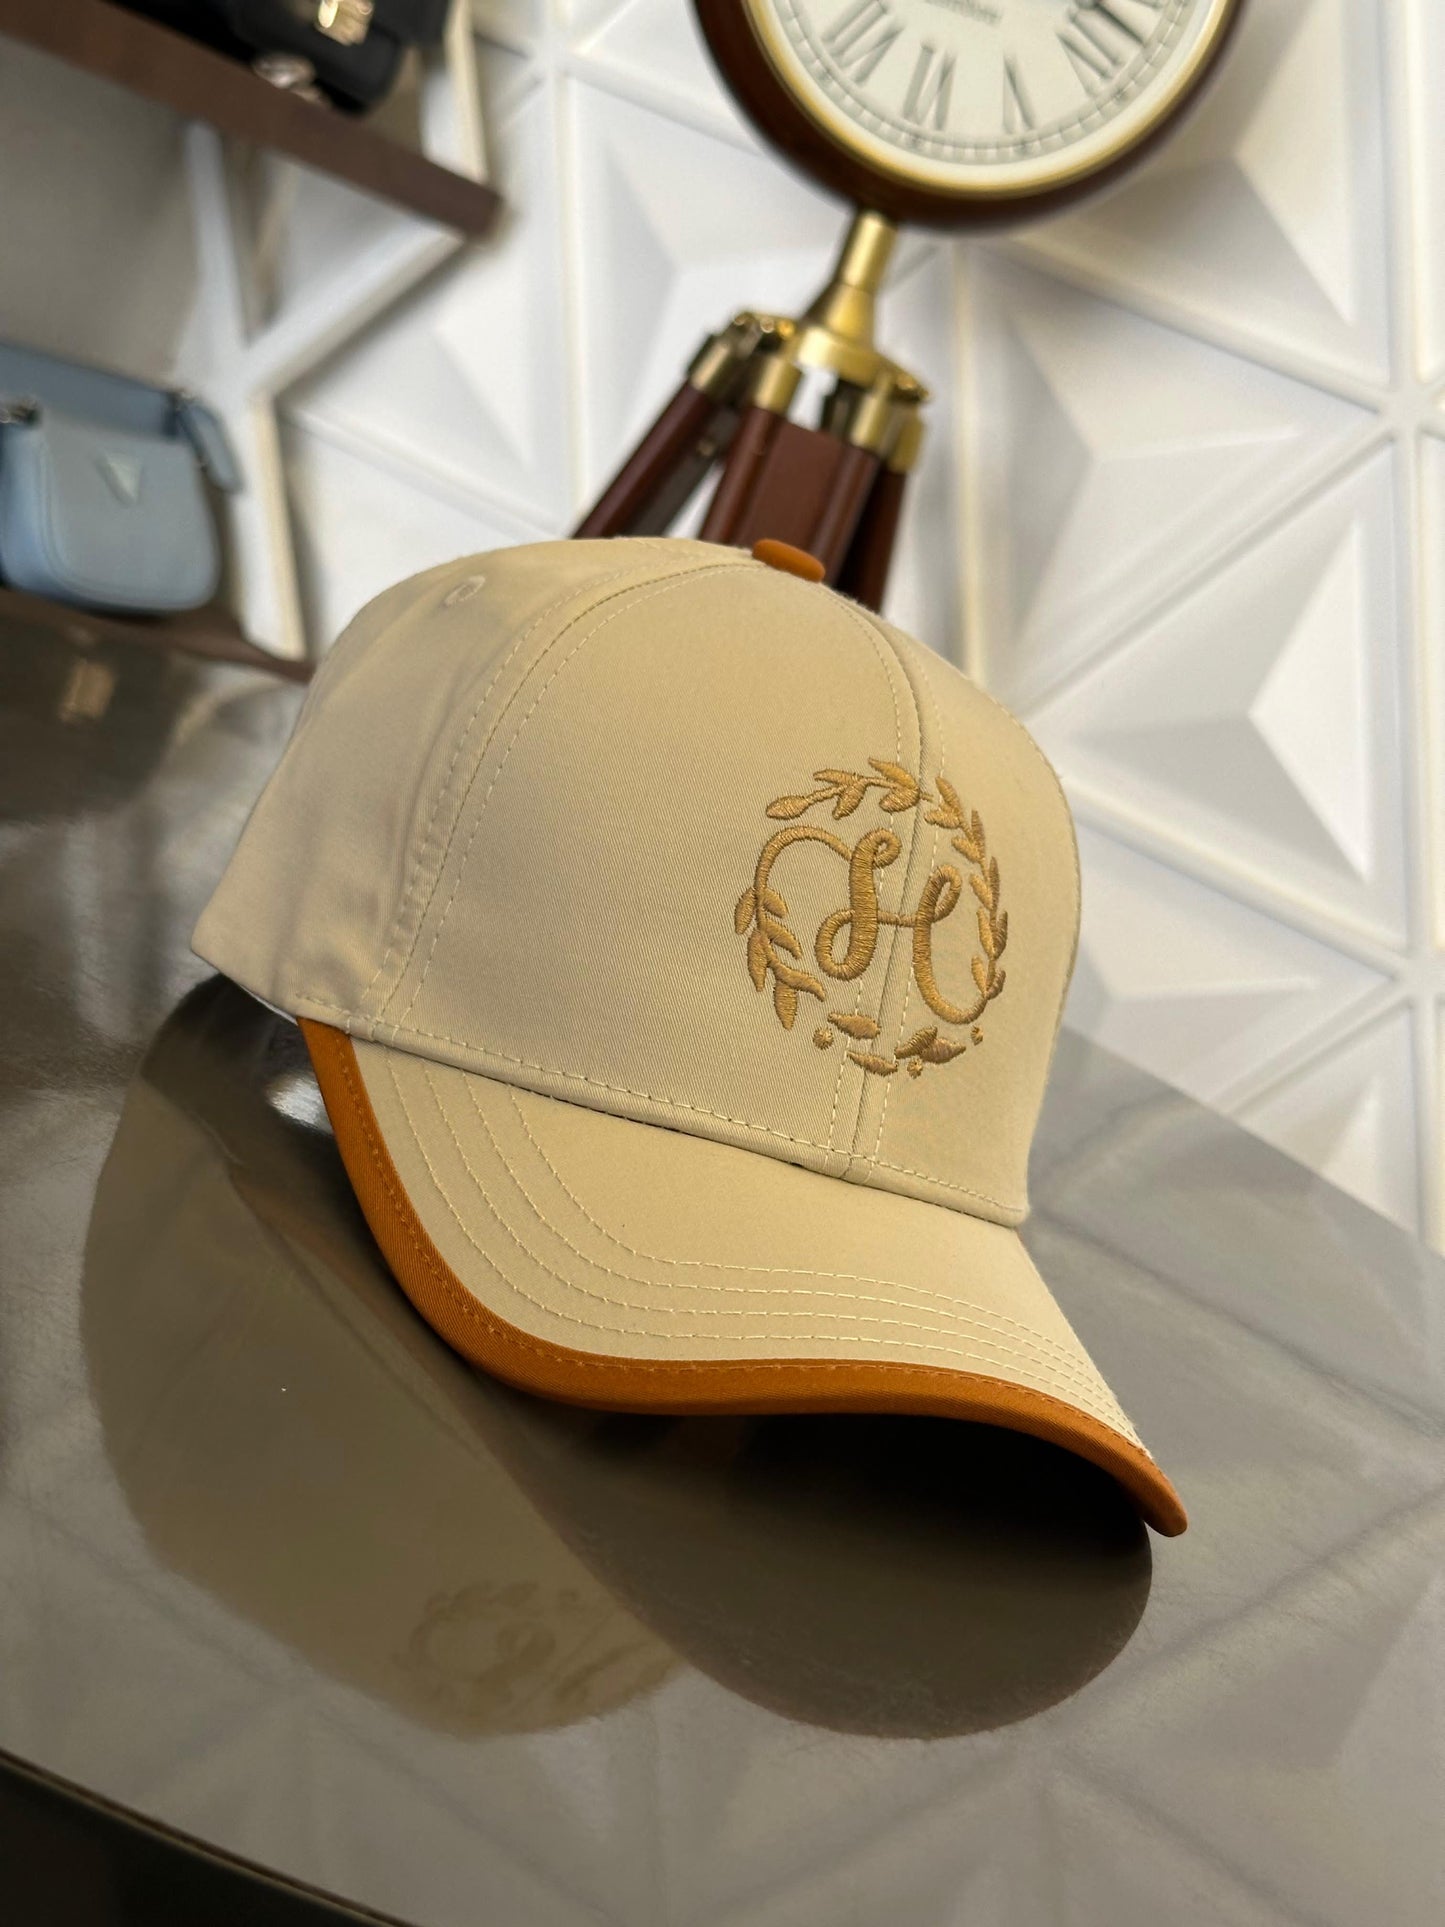 Luxury Embroidered Baseball Caps for Men and Women